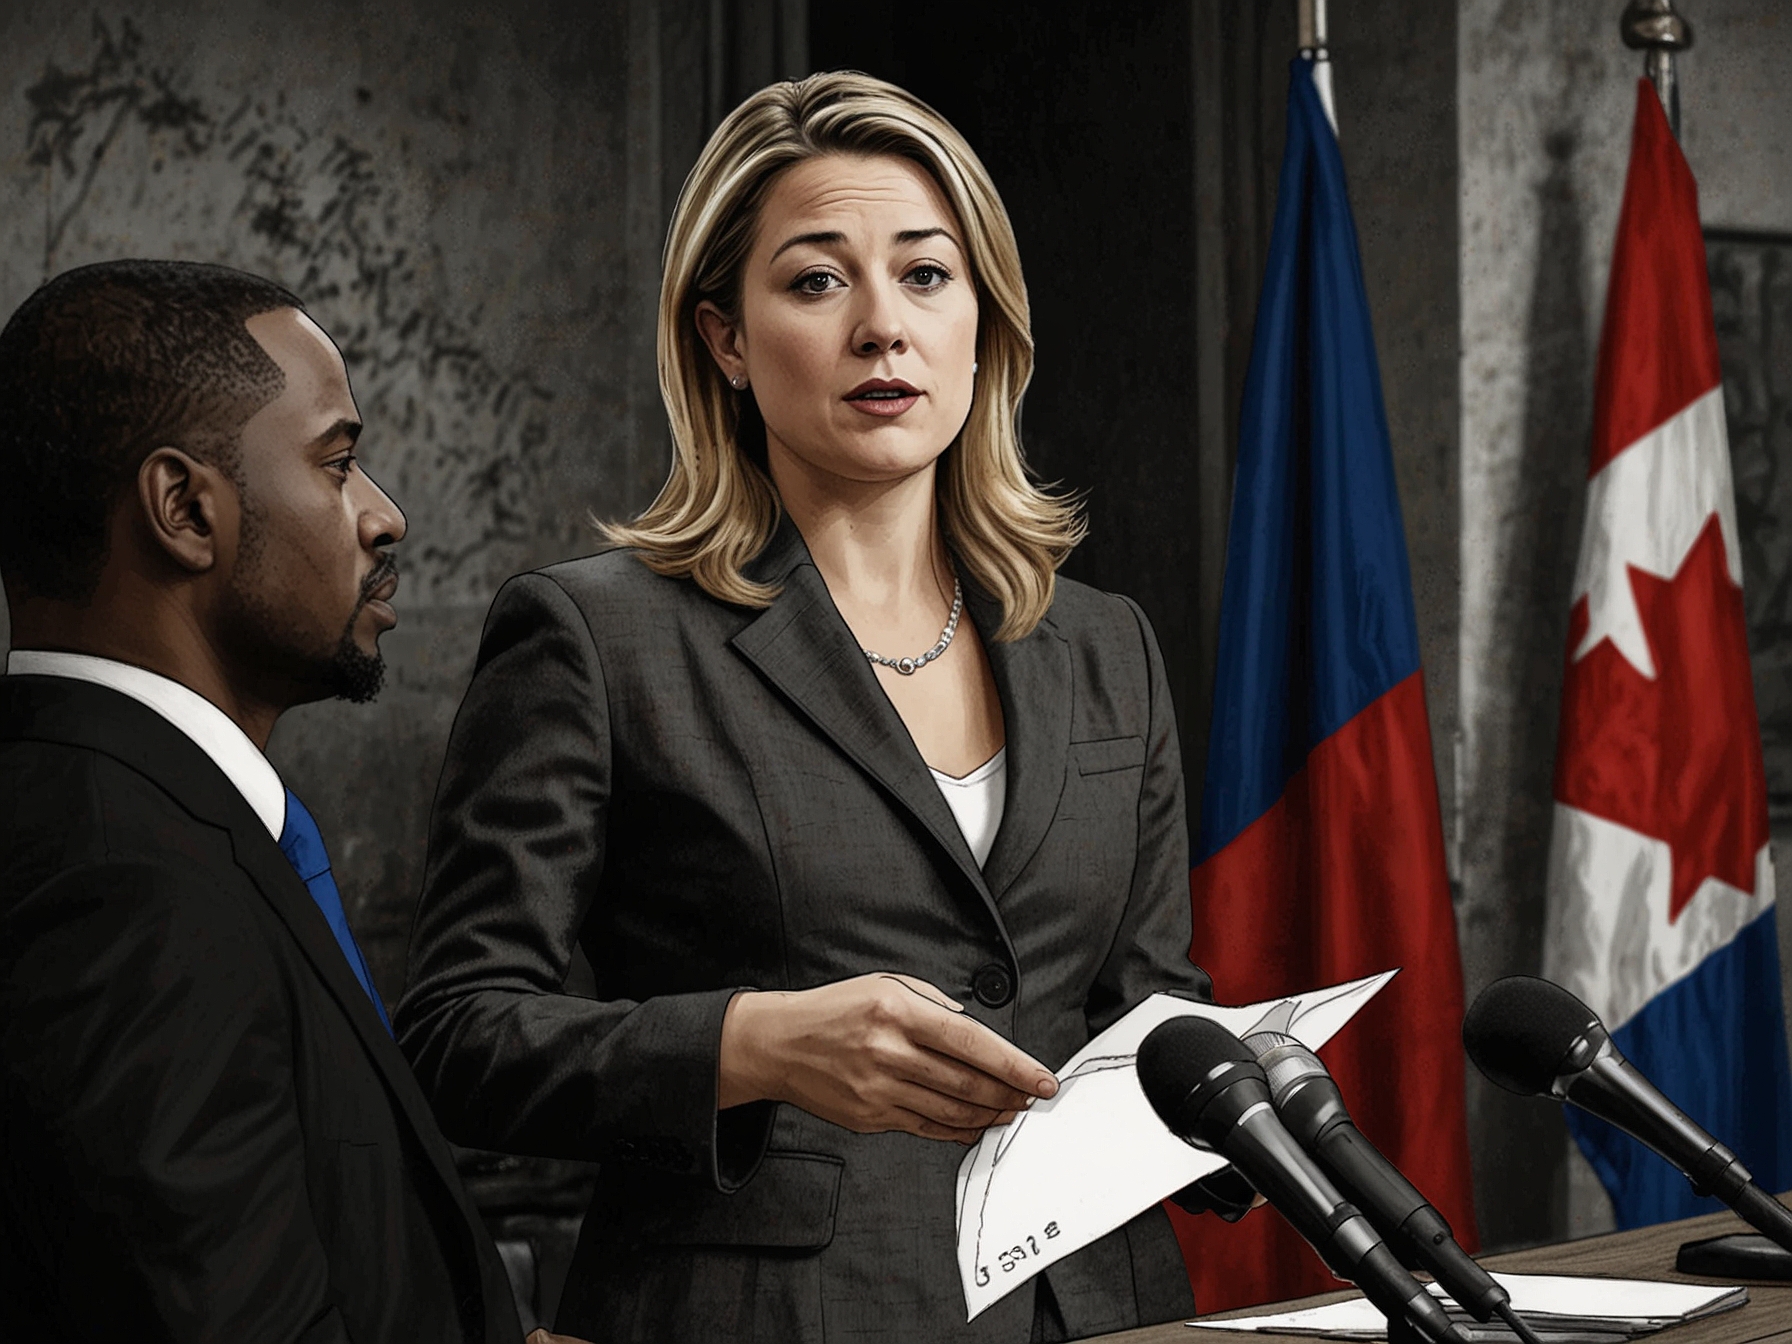 Foreign Affairs Minister Mélanie Joly addressing the media about Canada's new sanctions against Haitian gang leaders following a surge in violence in the country.